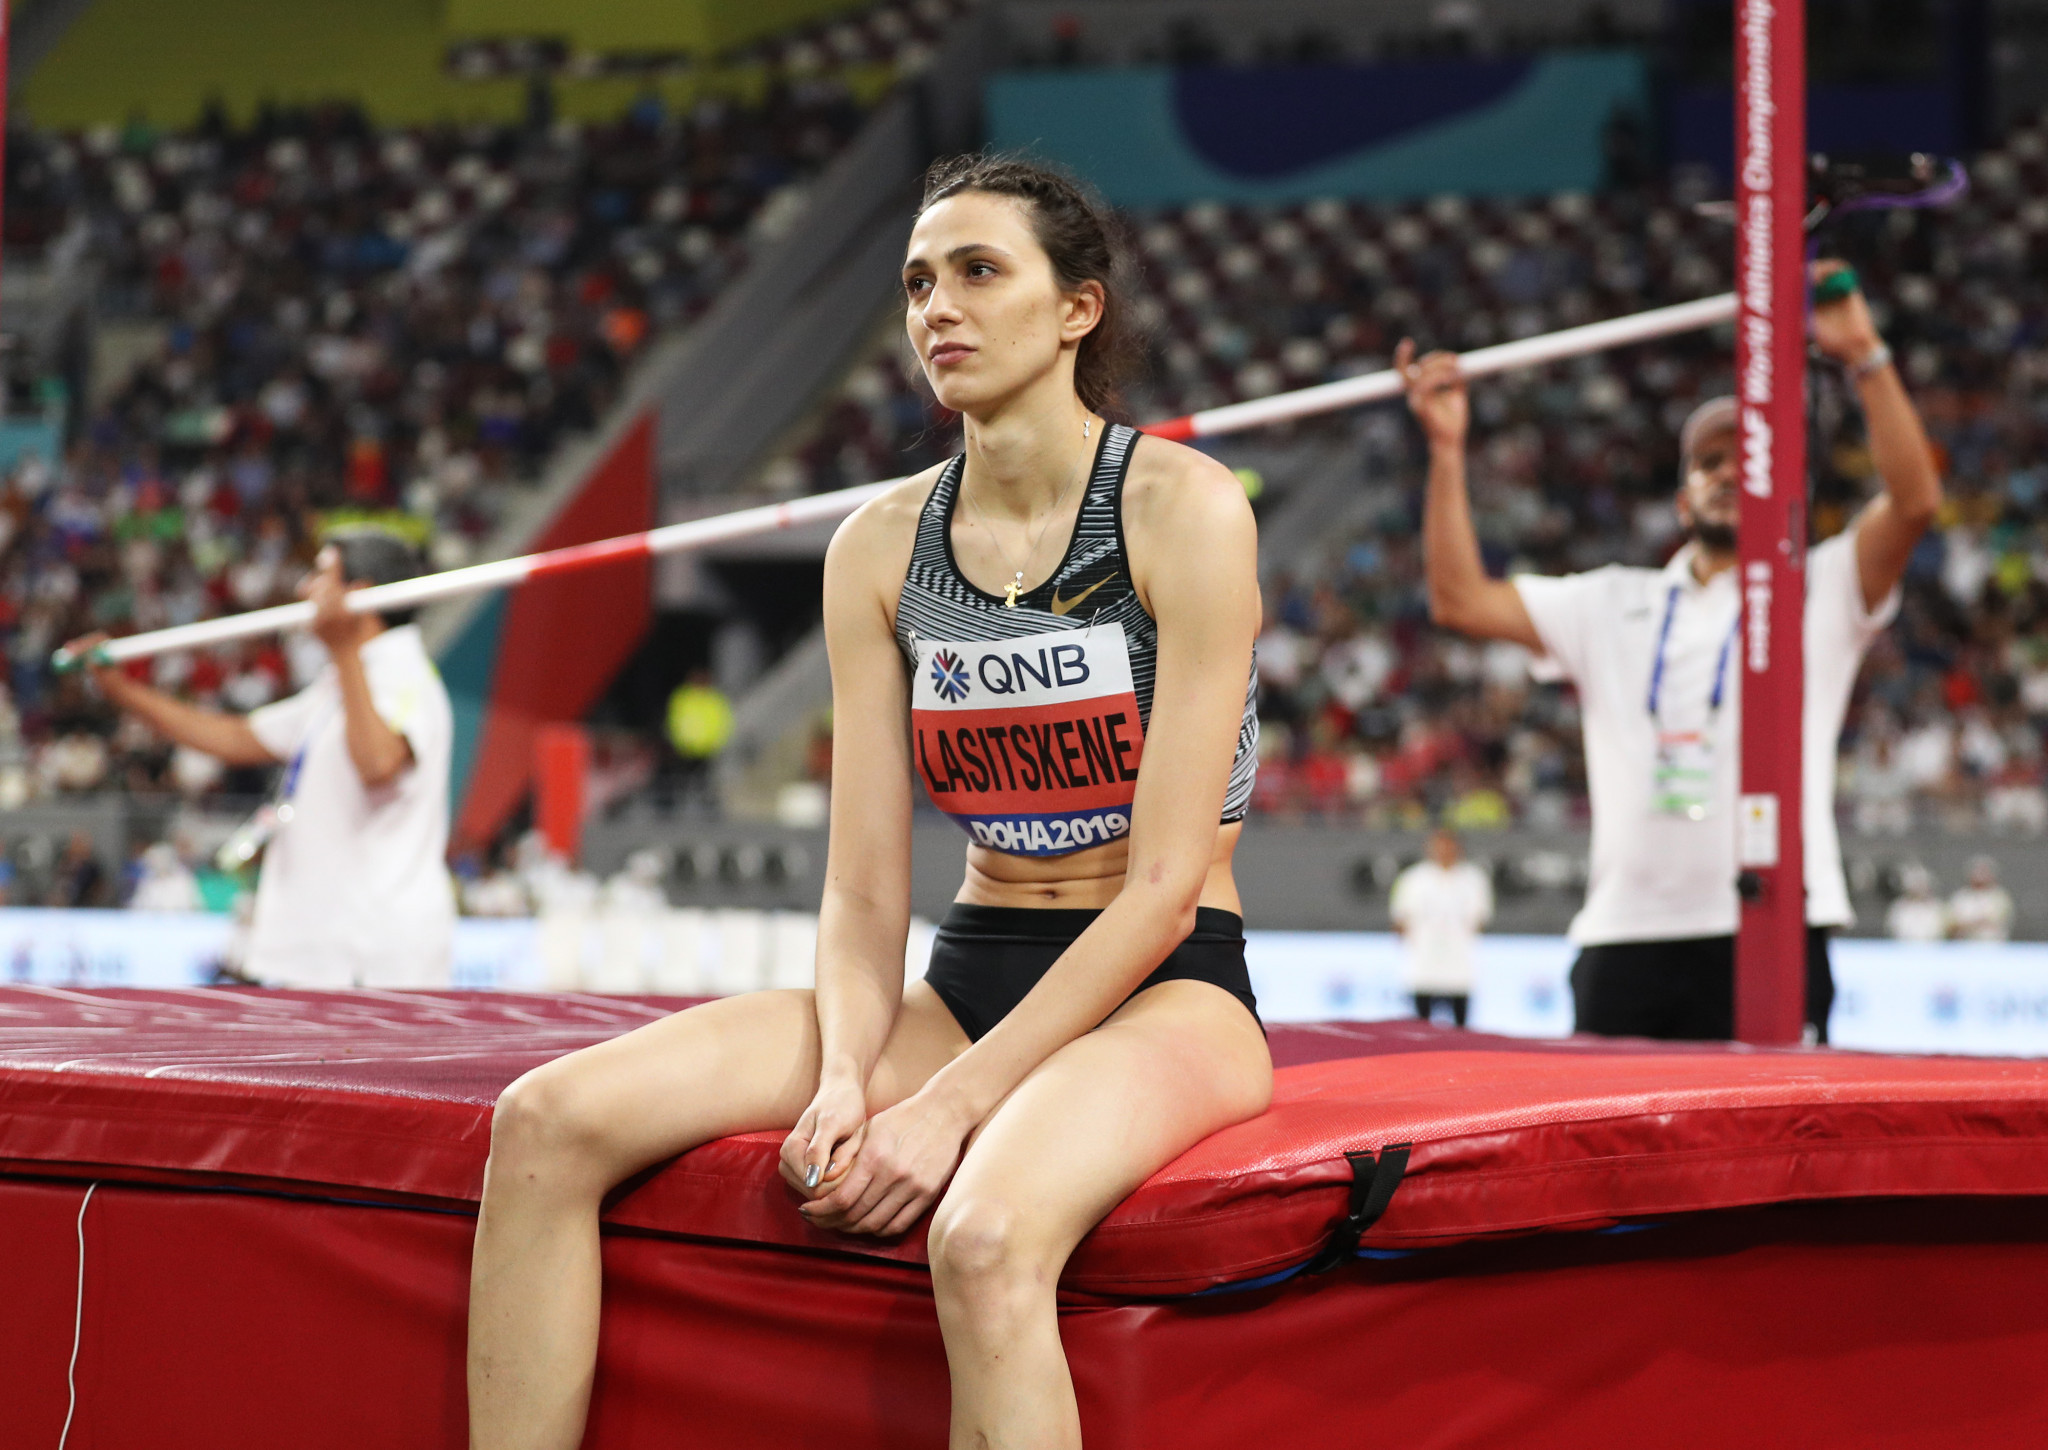 Russia's three-times world high jump champion Mariya Lasitskene has tweeted her support for fellow athlete Sergey Shubenkov amidst allegations that he has produced an adverse test that he has strongly denied ©Getty Images